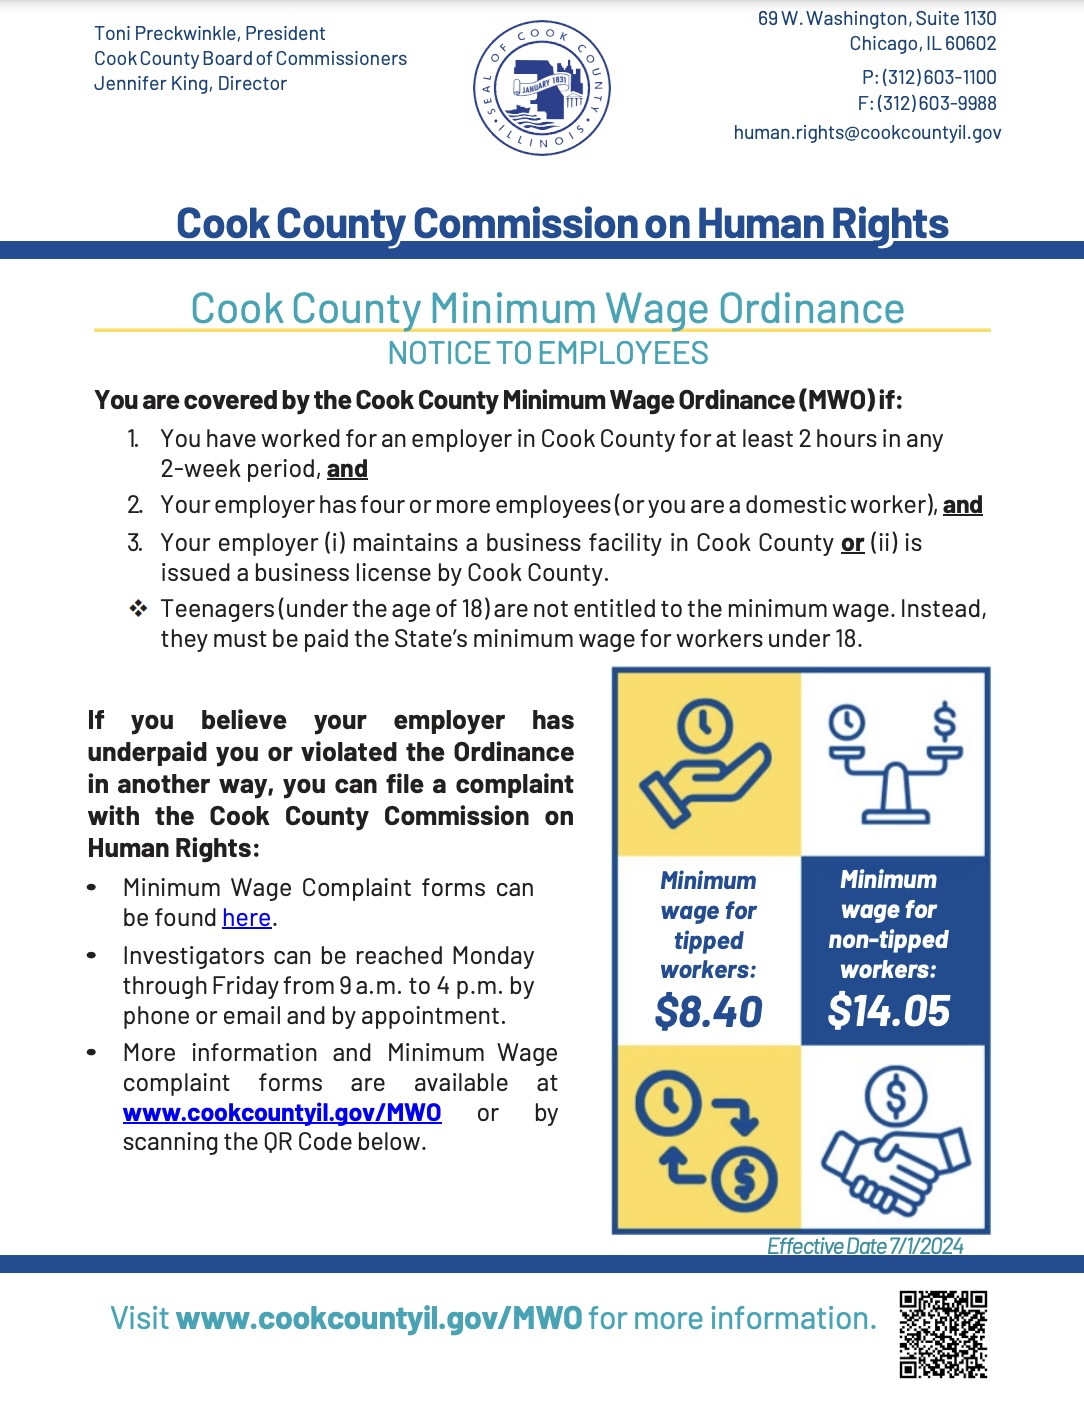 Cook County minimum wage poster